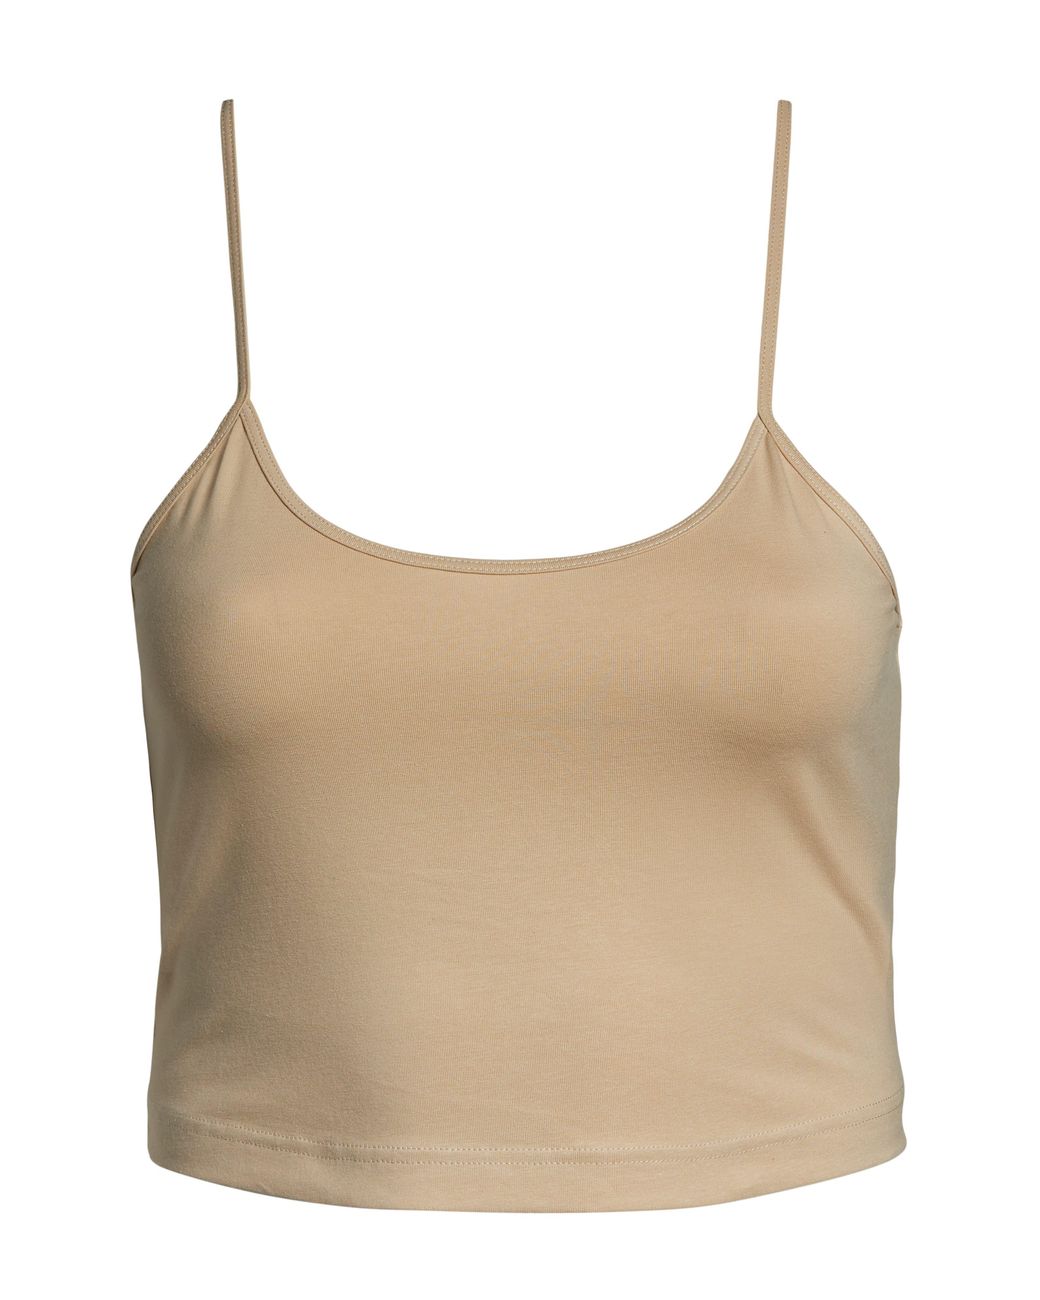 BP. Knit Organic Cotton Crop Camisole In Tan Doeskin At Nordstrom